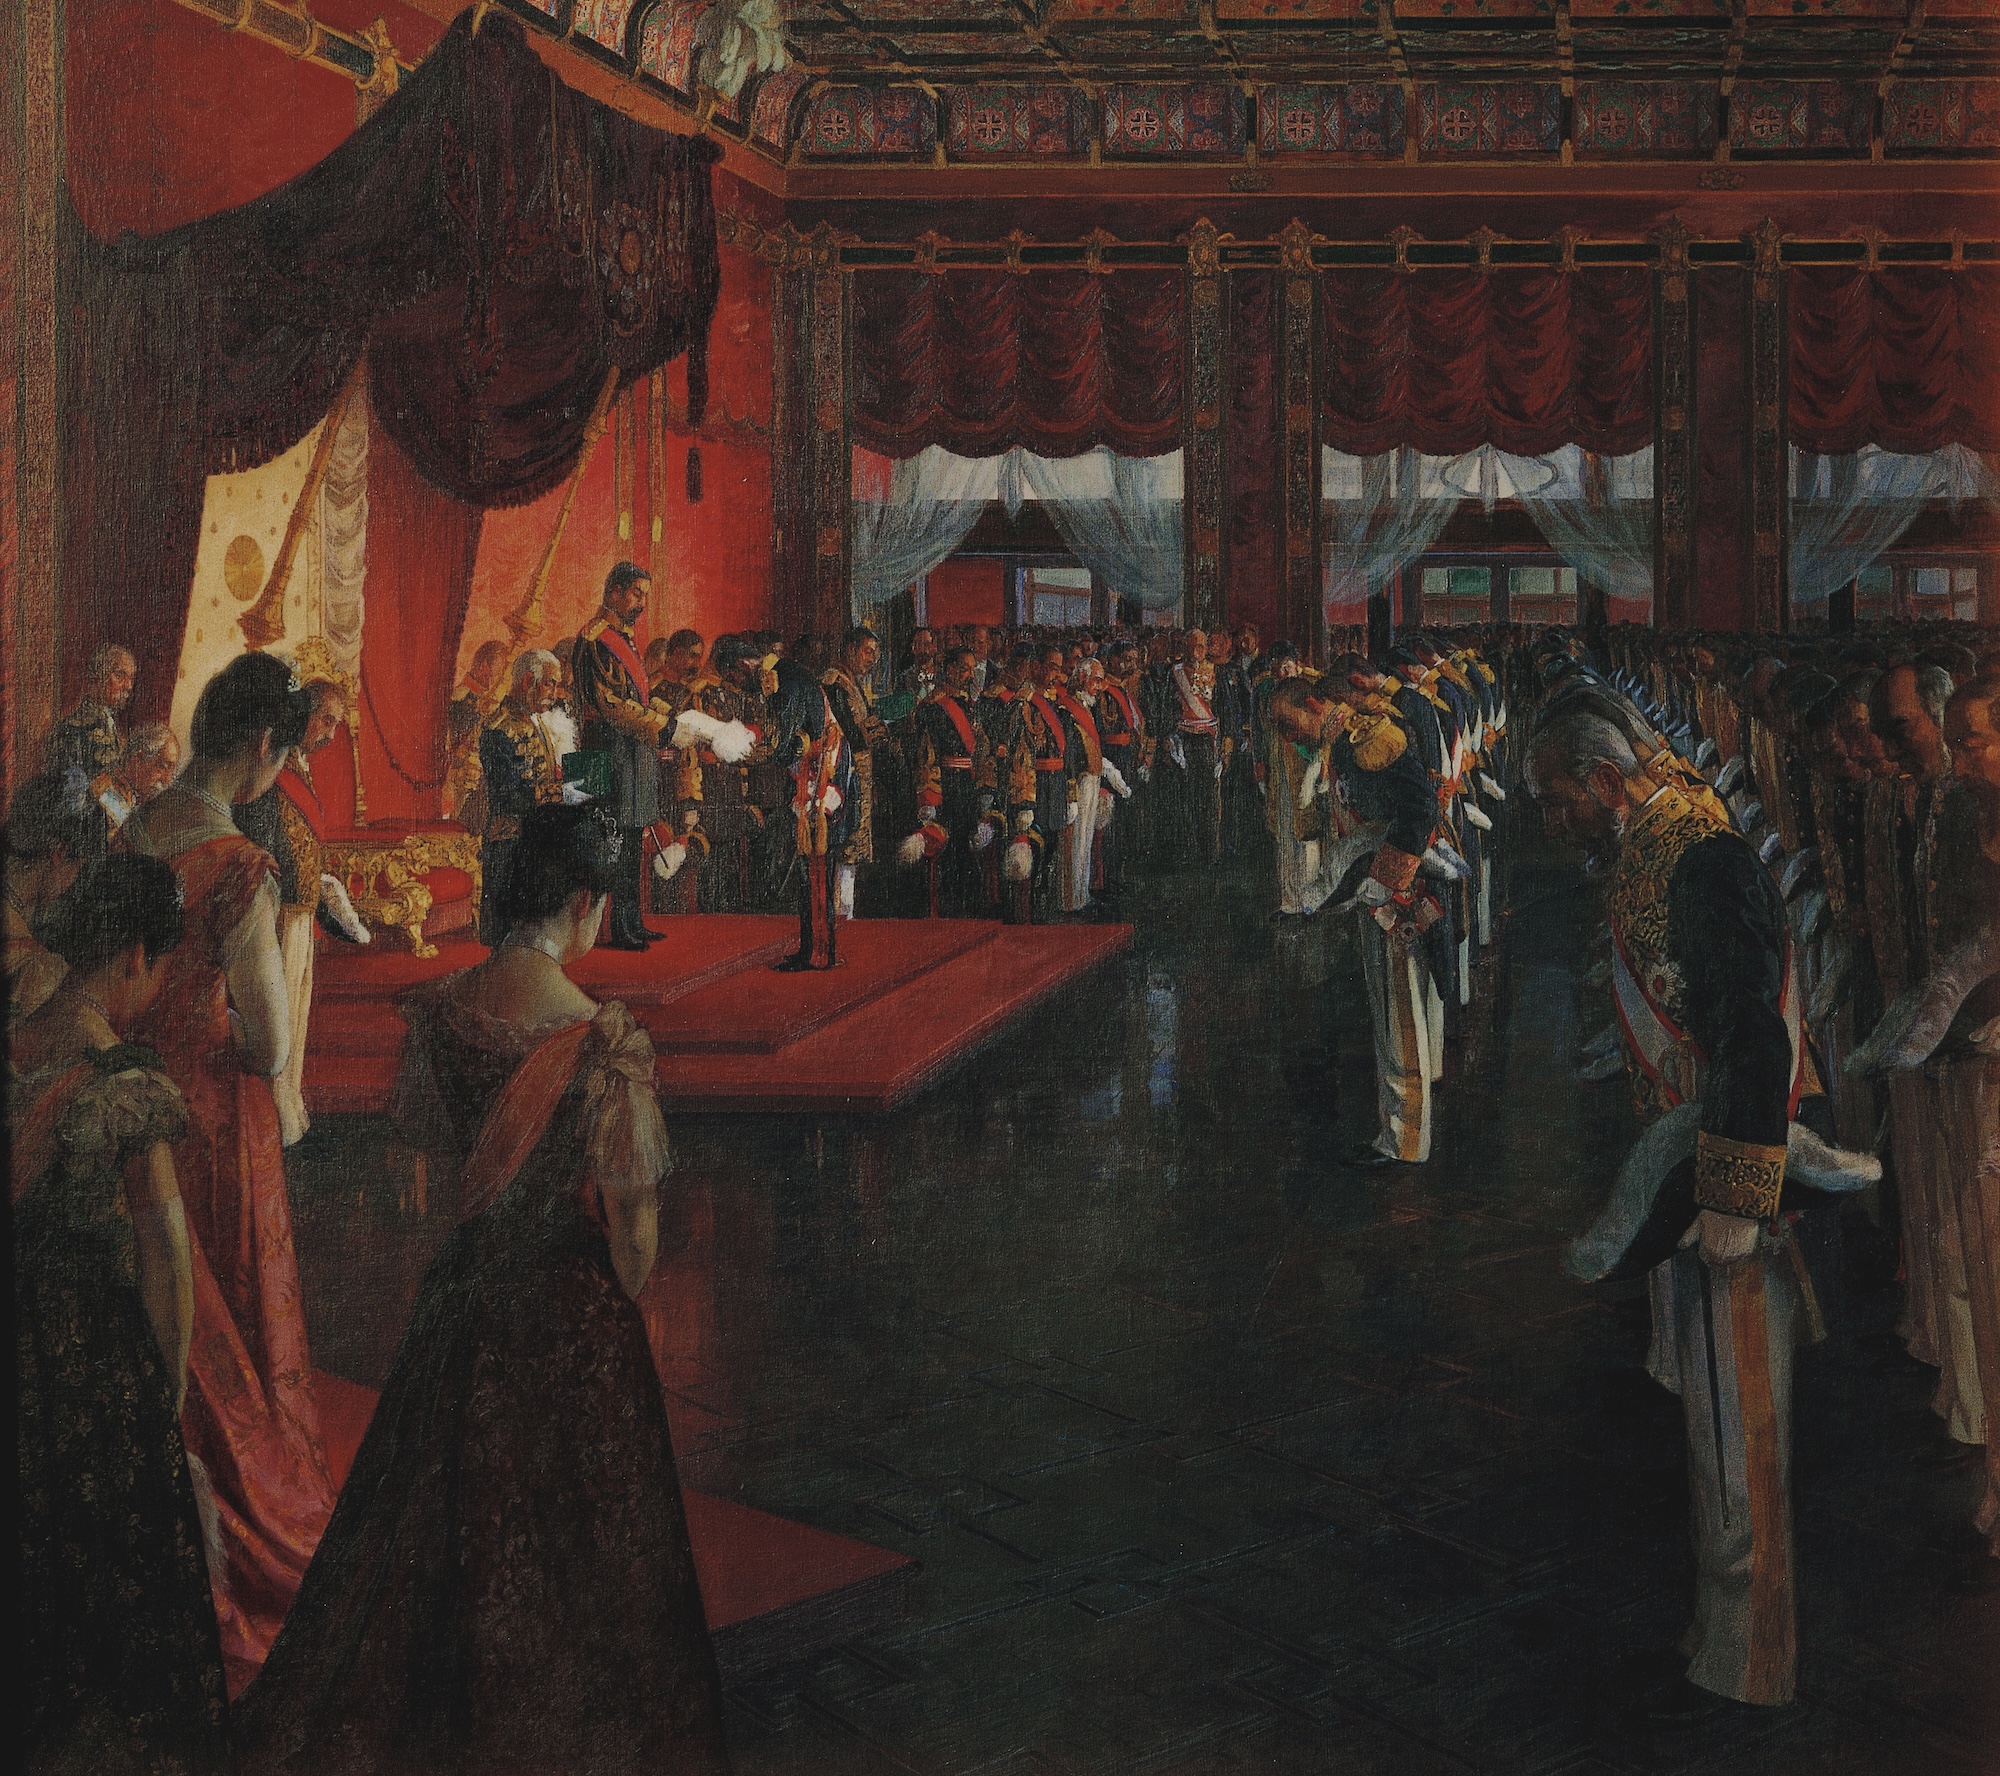 Ceremony for the Promulgation of the Constitution by Wada Eisaku, showing the Emperor presenting the Constitution to Prime Minister Kuroda Kiyotaka at a ceremony in the Imperial Palace on 11 February 1889